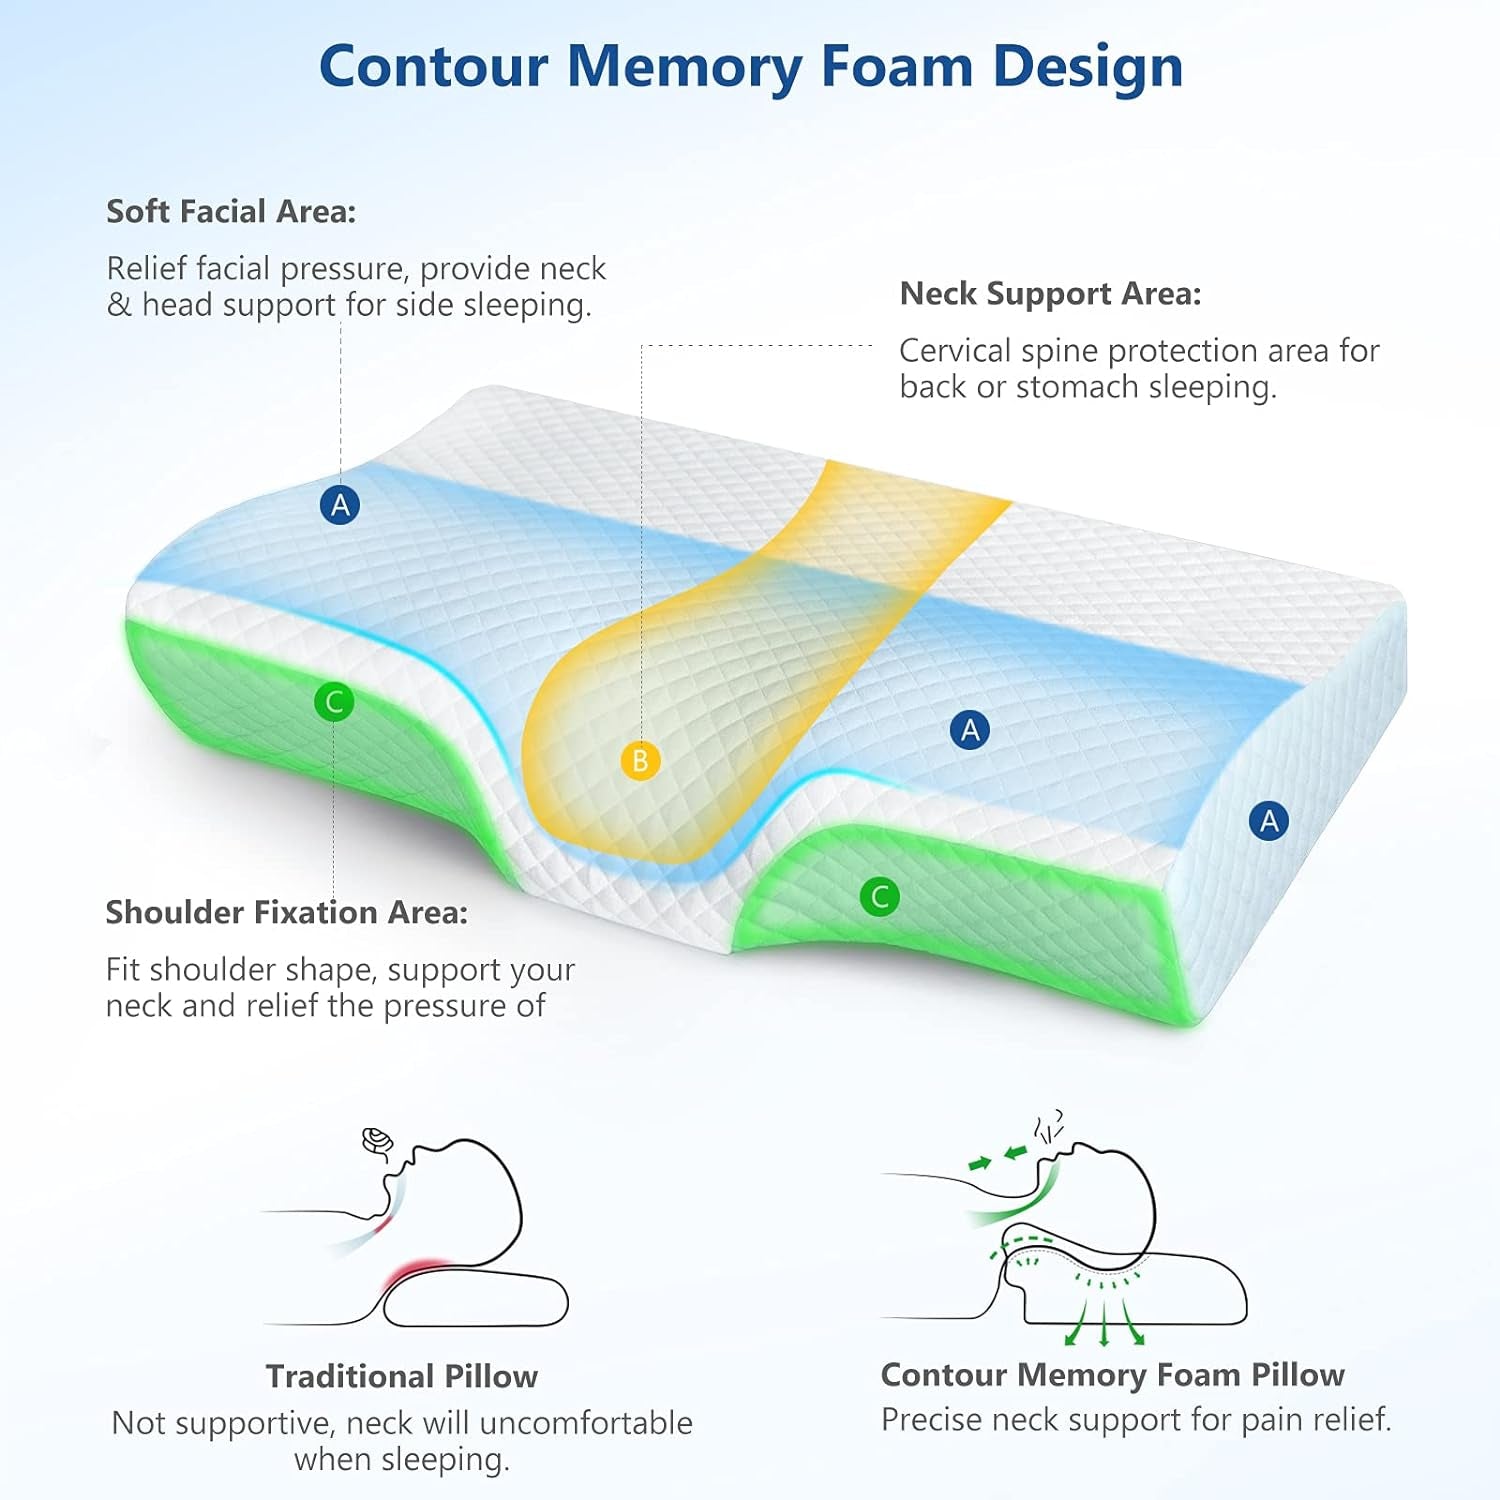 Orthopedic Contour Memory Foam Pillow for Neck Pain Relief - Adjustable Ergonomic Cervical Pillow for Sleeping - Washable Cover - Ideal for Side, Back, and Stomach Sleepers